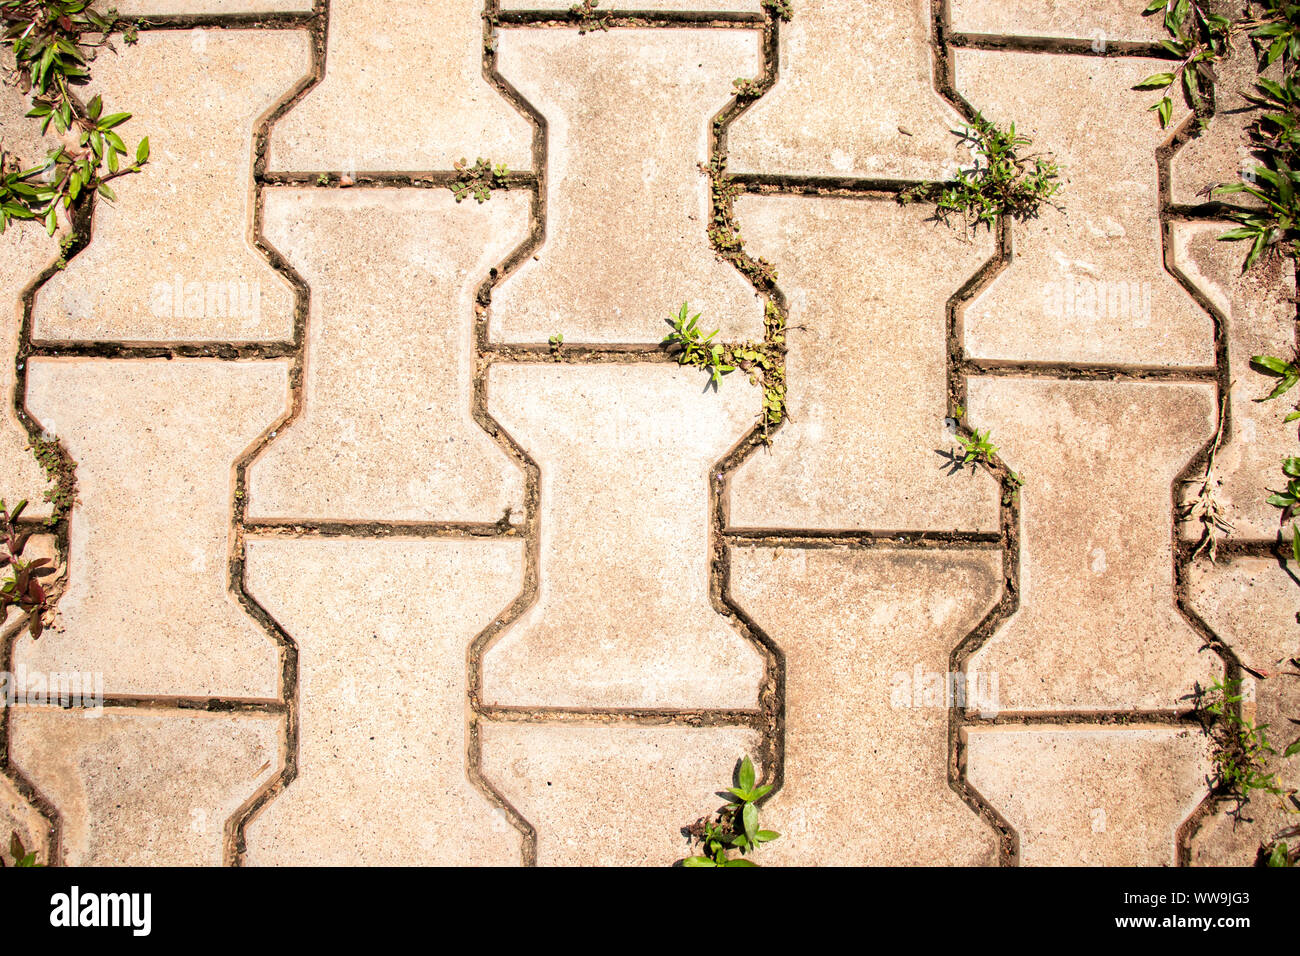 old cement tile texture with grass Stock Photo